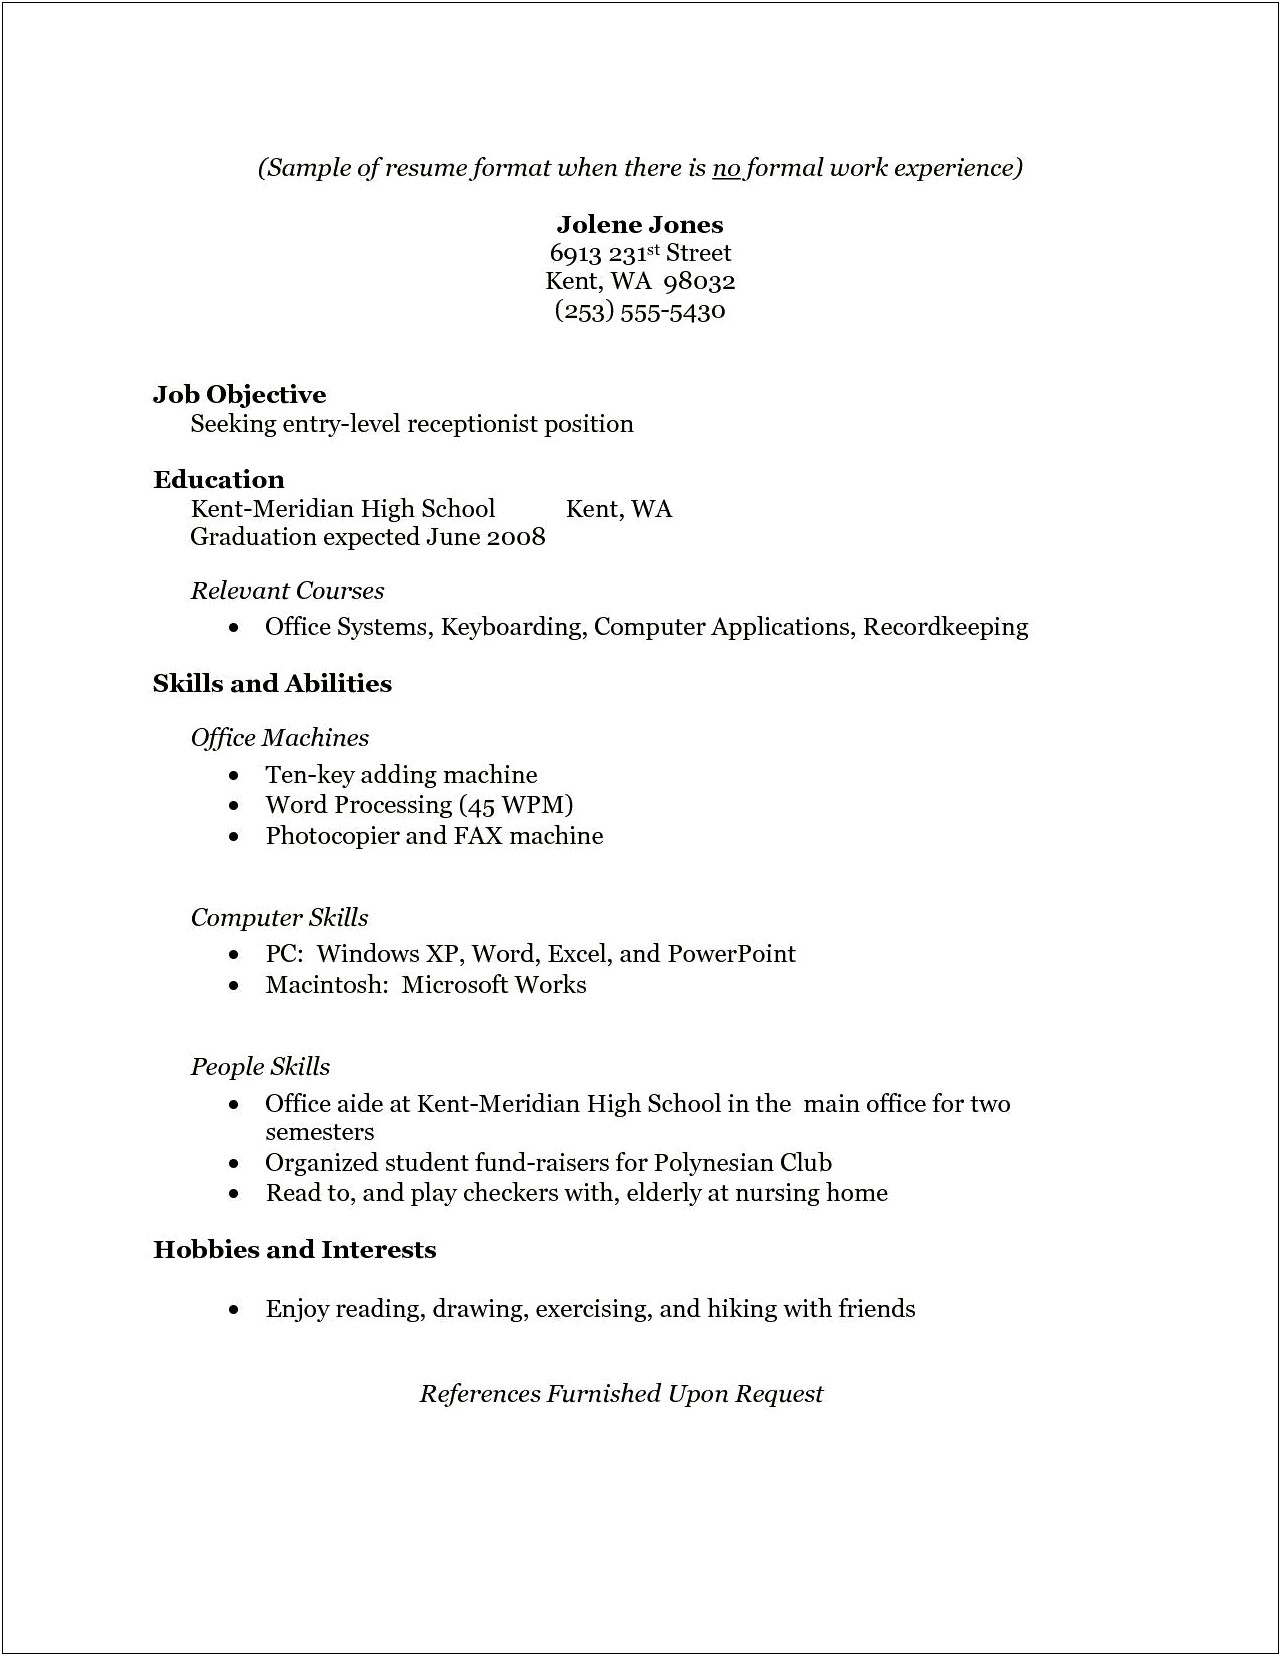 Template Resume With No Work Experience